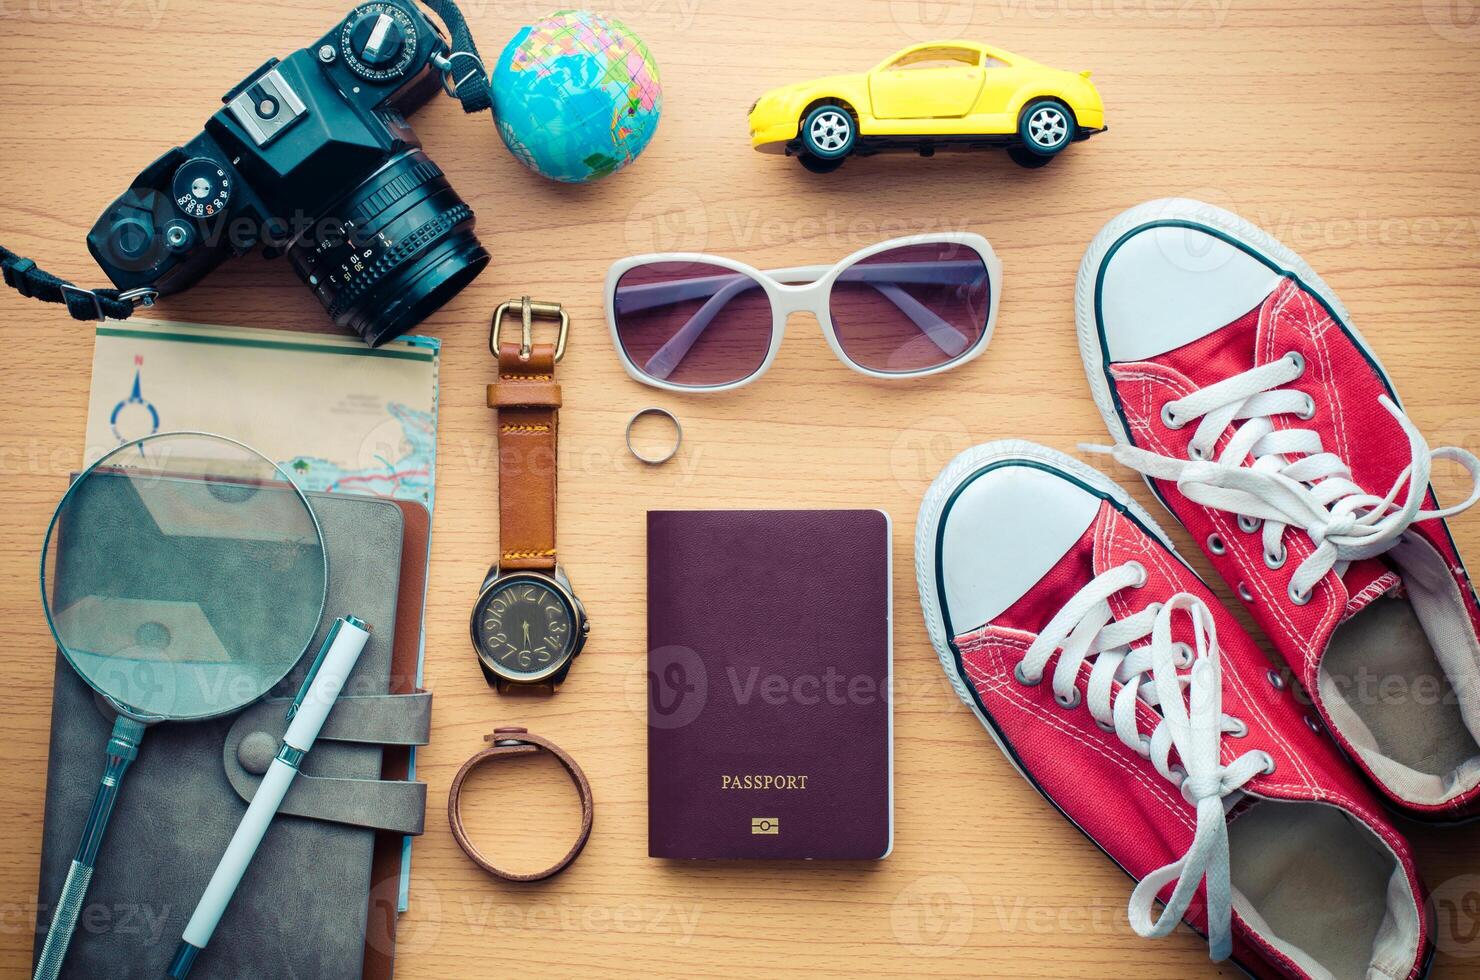 Travel accessories for trip photo